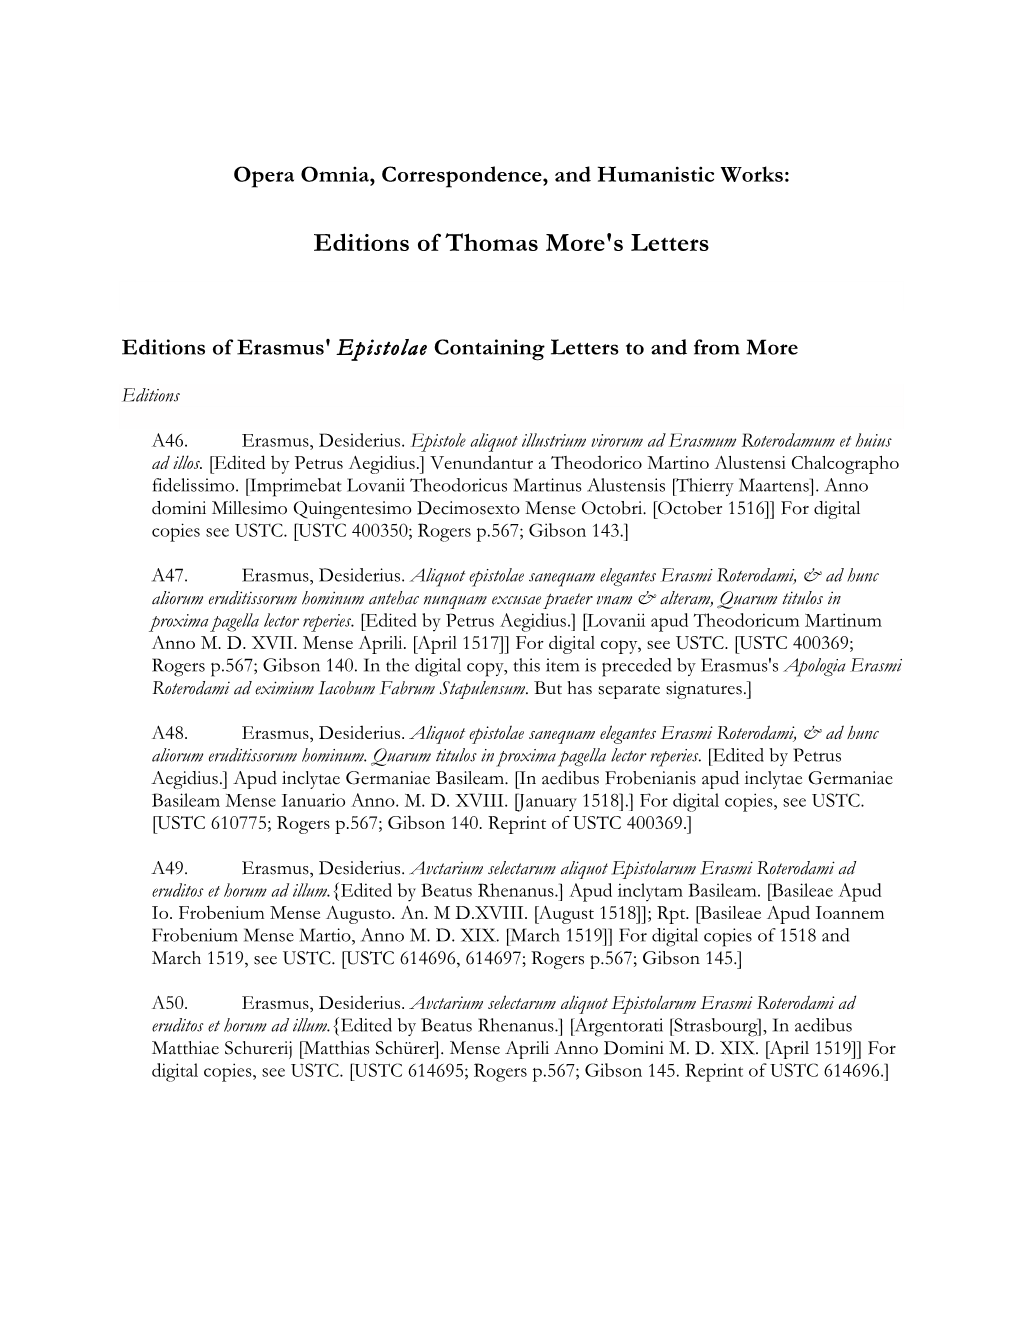 Editions of Thomas More's Letters